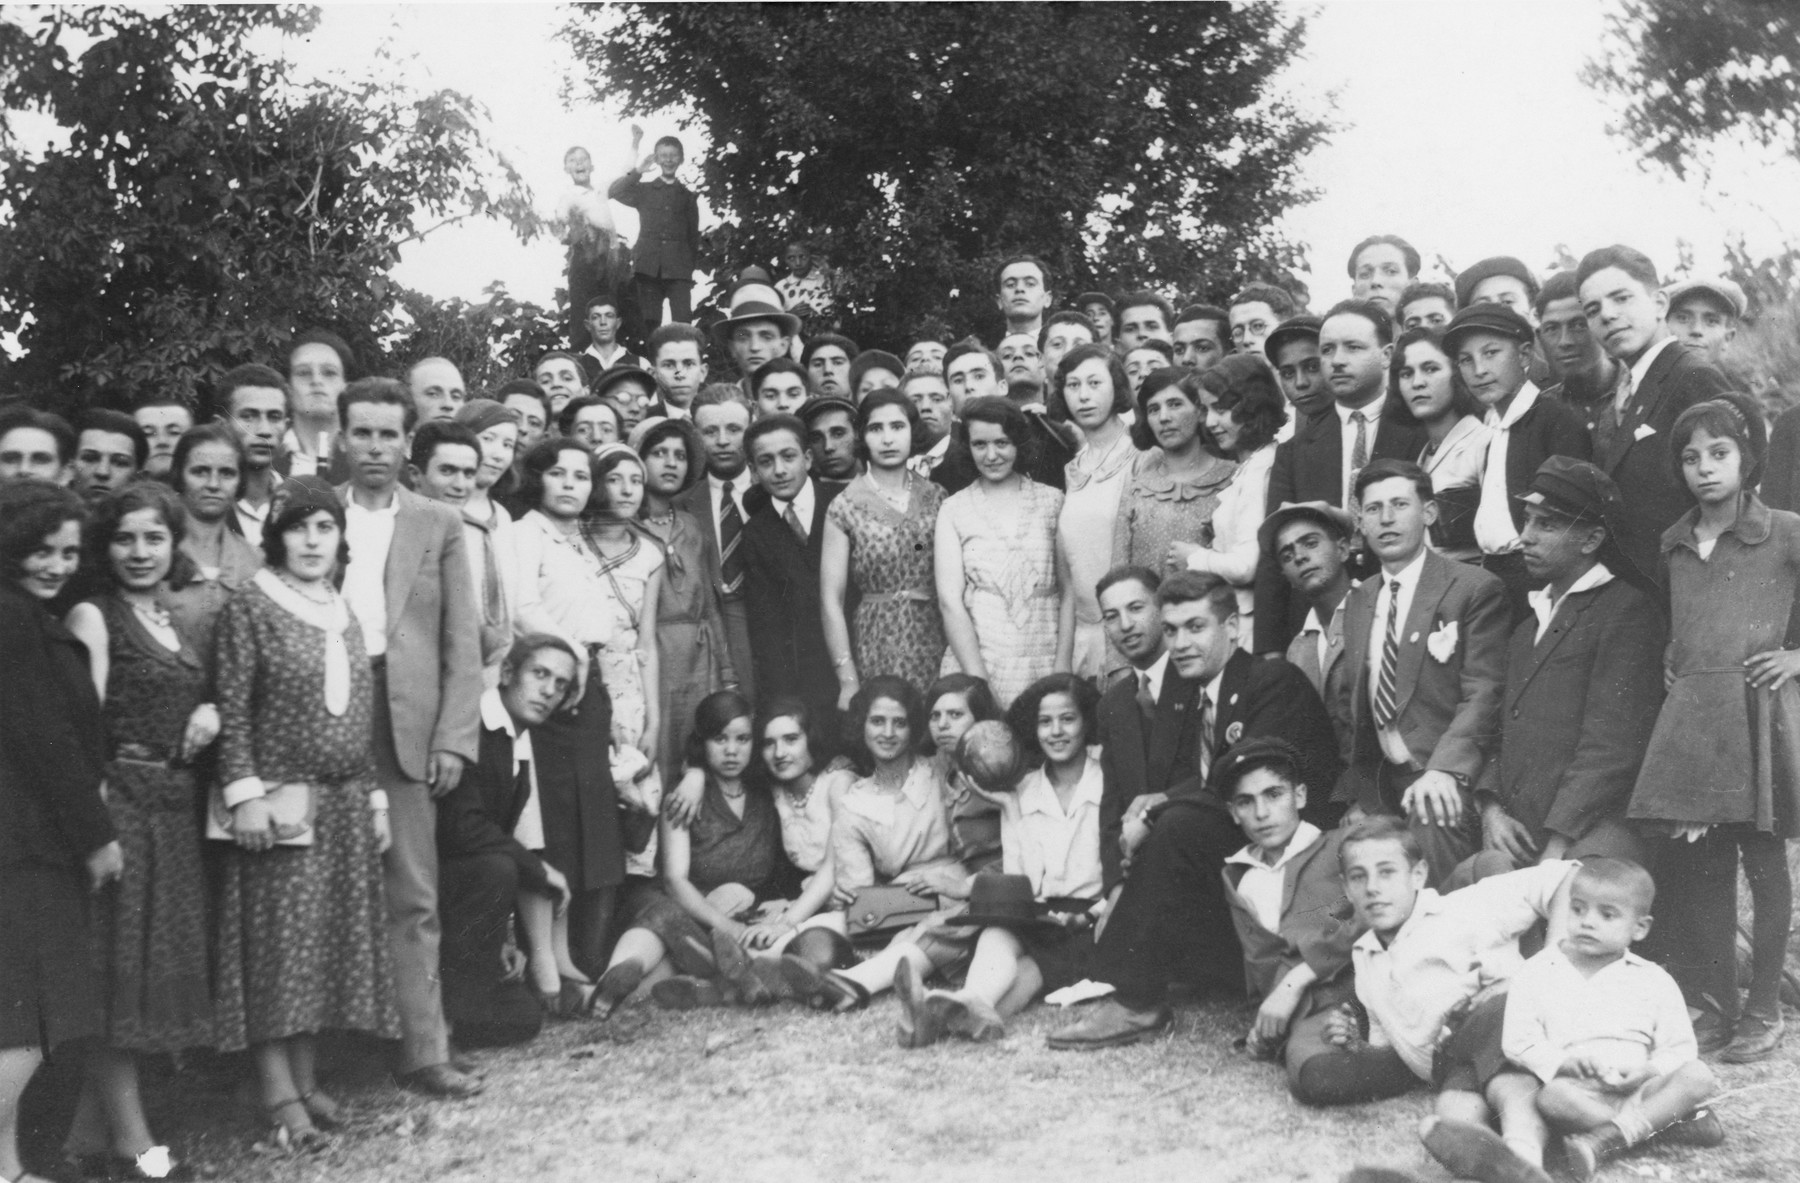 A group of Macedonian Jewish young men women and children pose together outside.